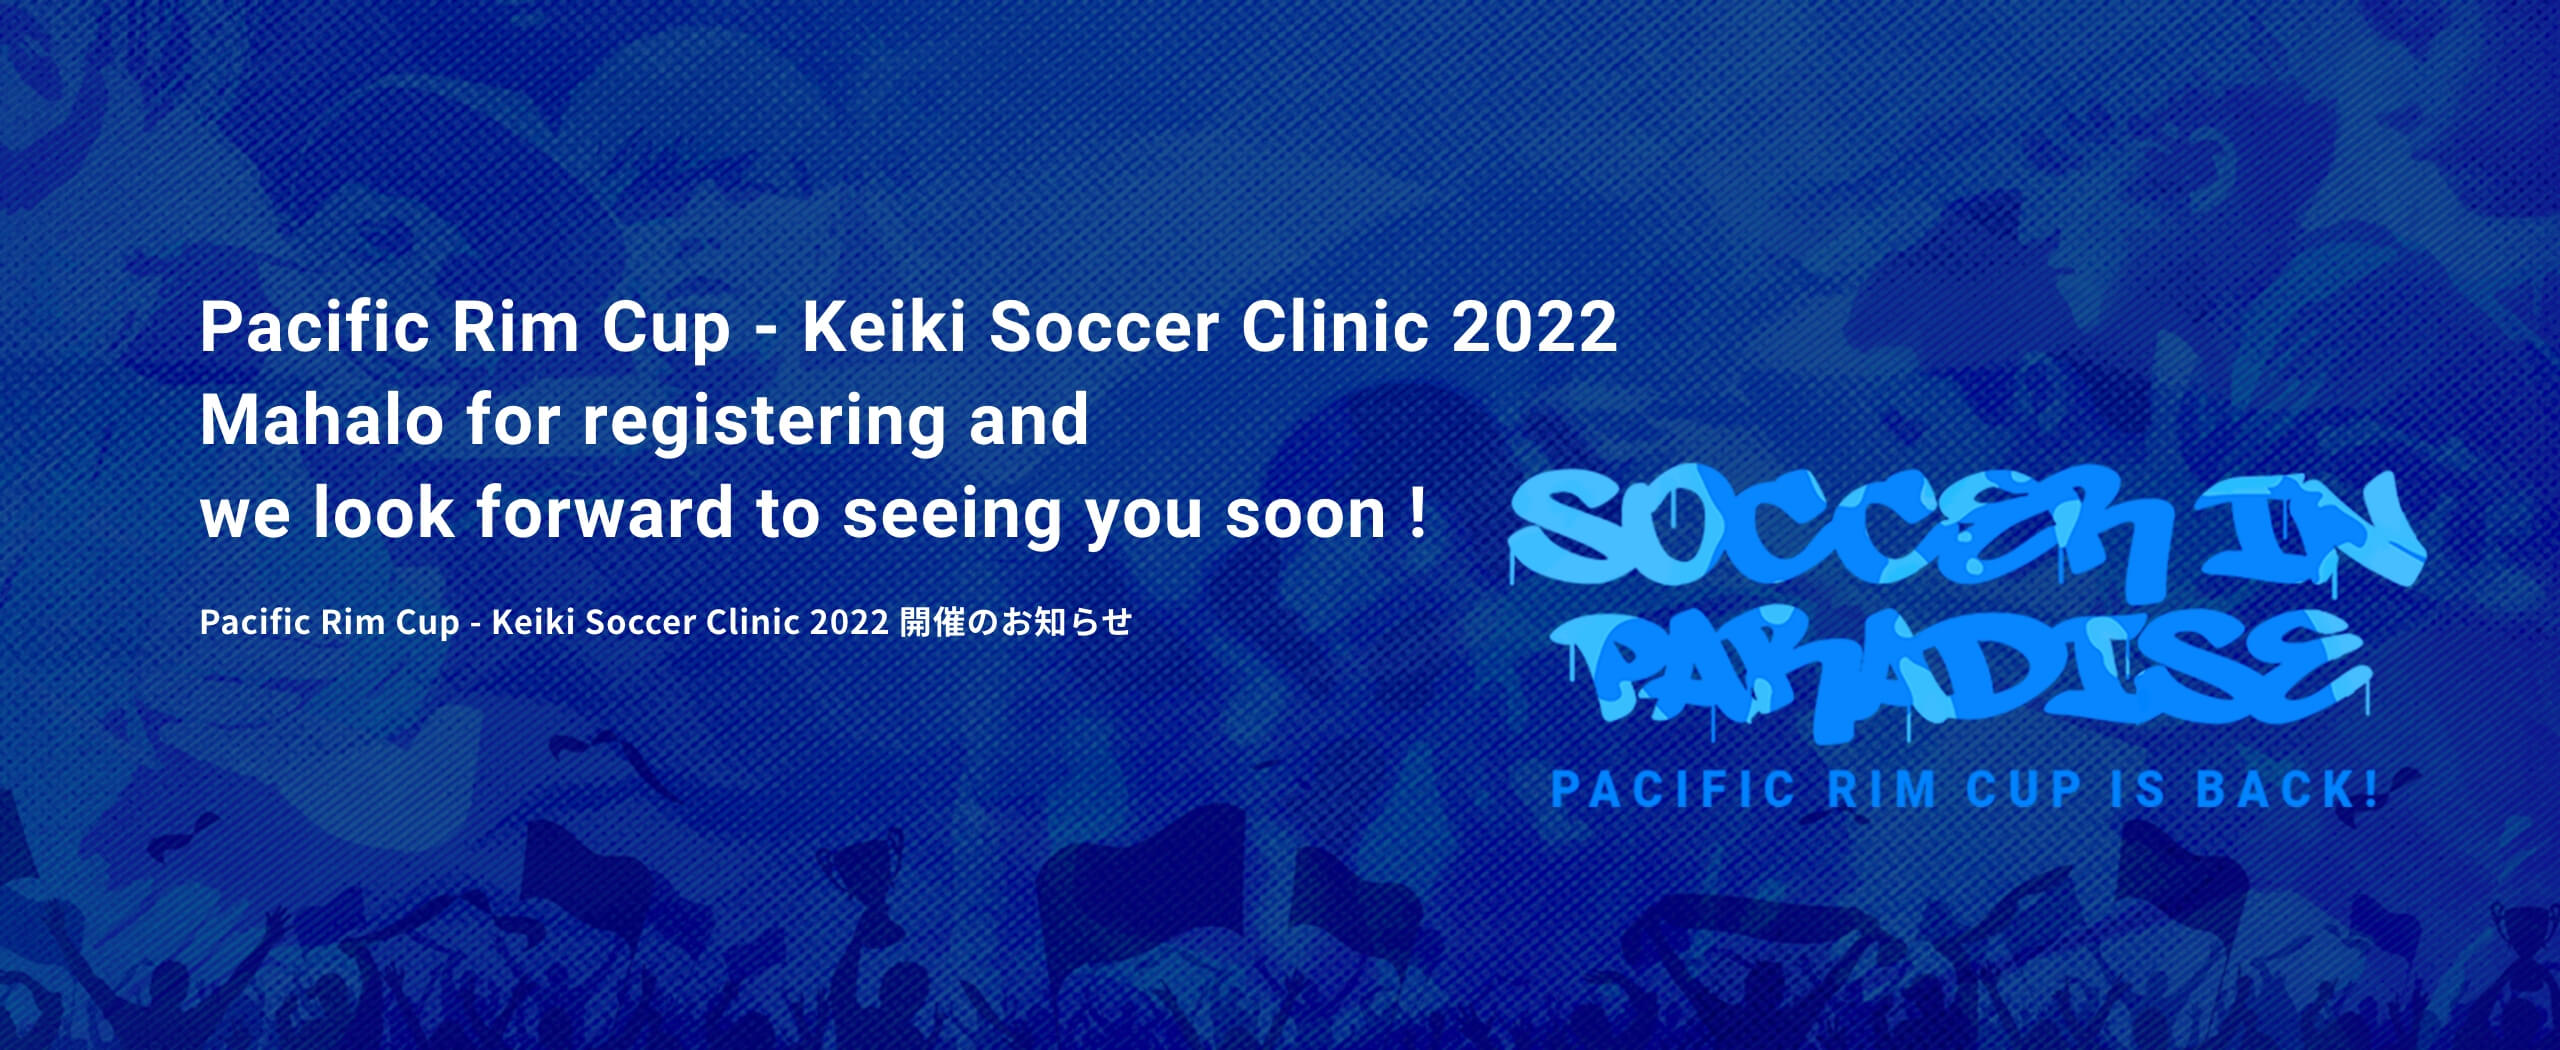 Pacific Rim Cup - Keiki Soccer Clinic 2022 Mahalo for registering and we look forward to seeing you soon ! Pacific Rim Cup - Keiki Soccer Clinic 2022 開催のお知らせ